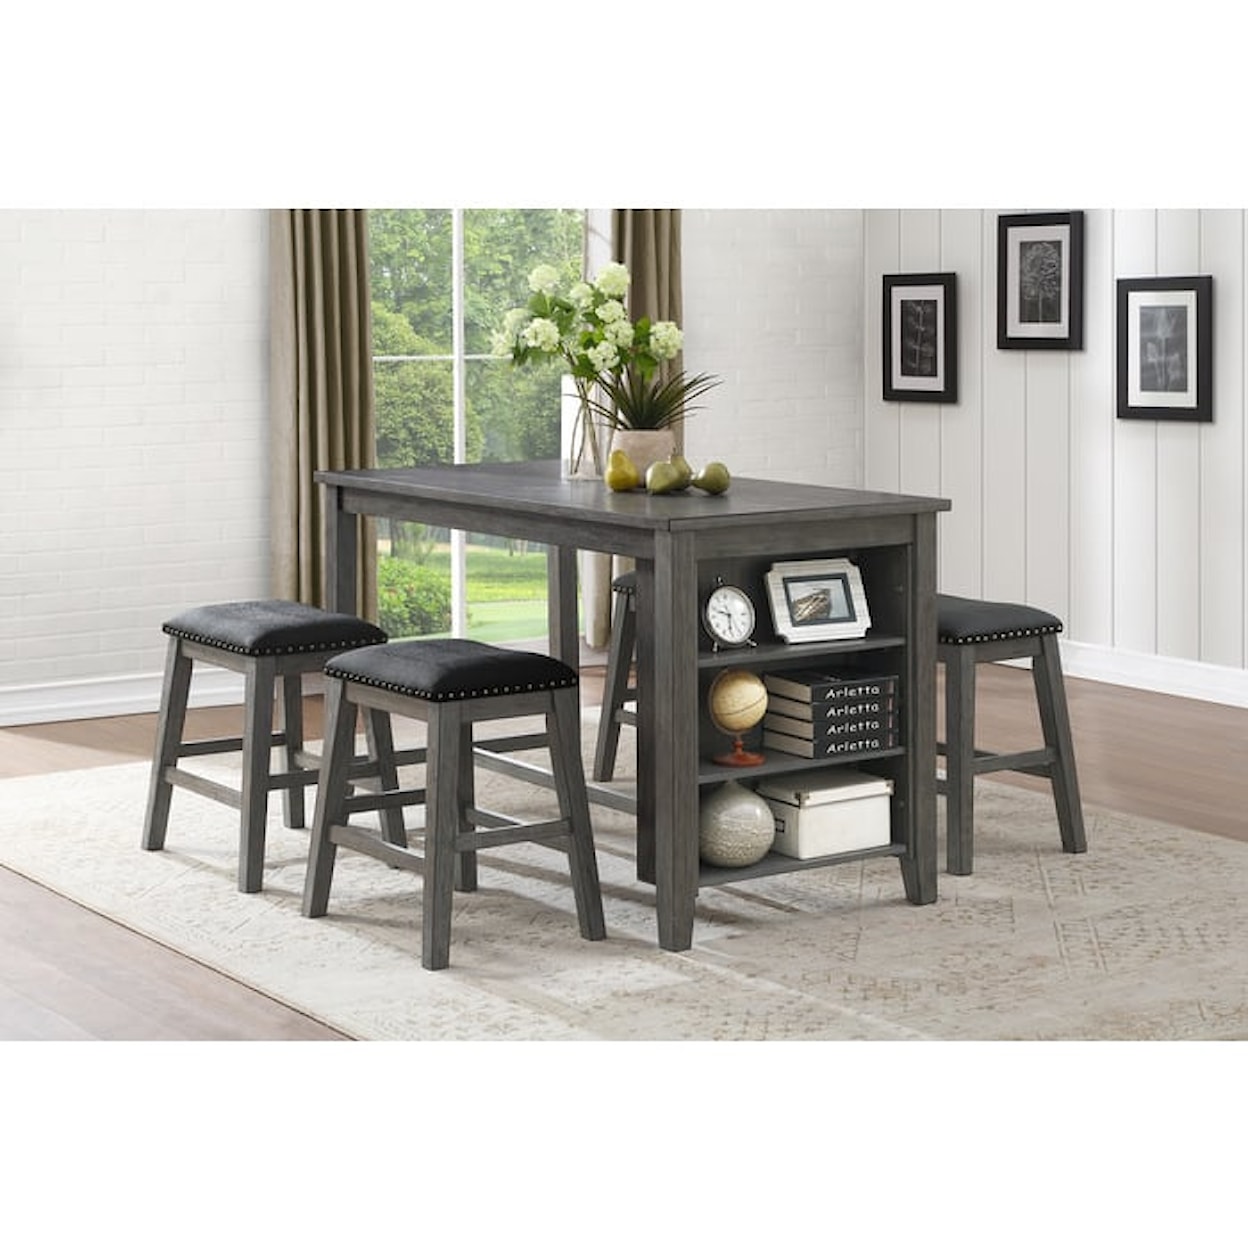 Homelegance Timbre Counter Height Stool